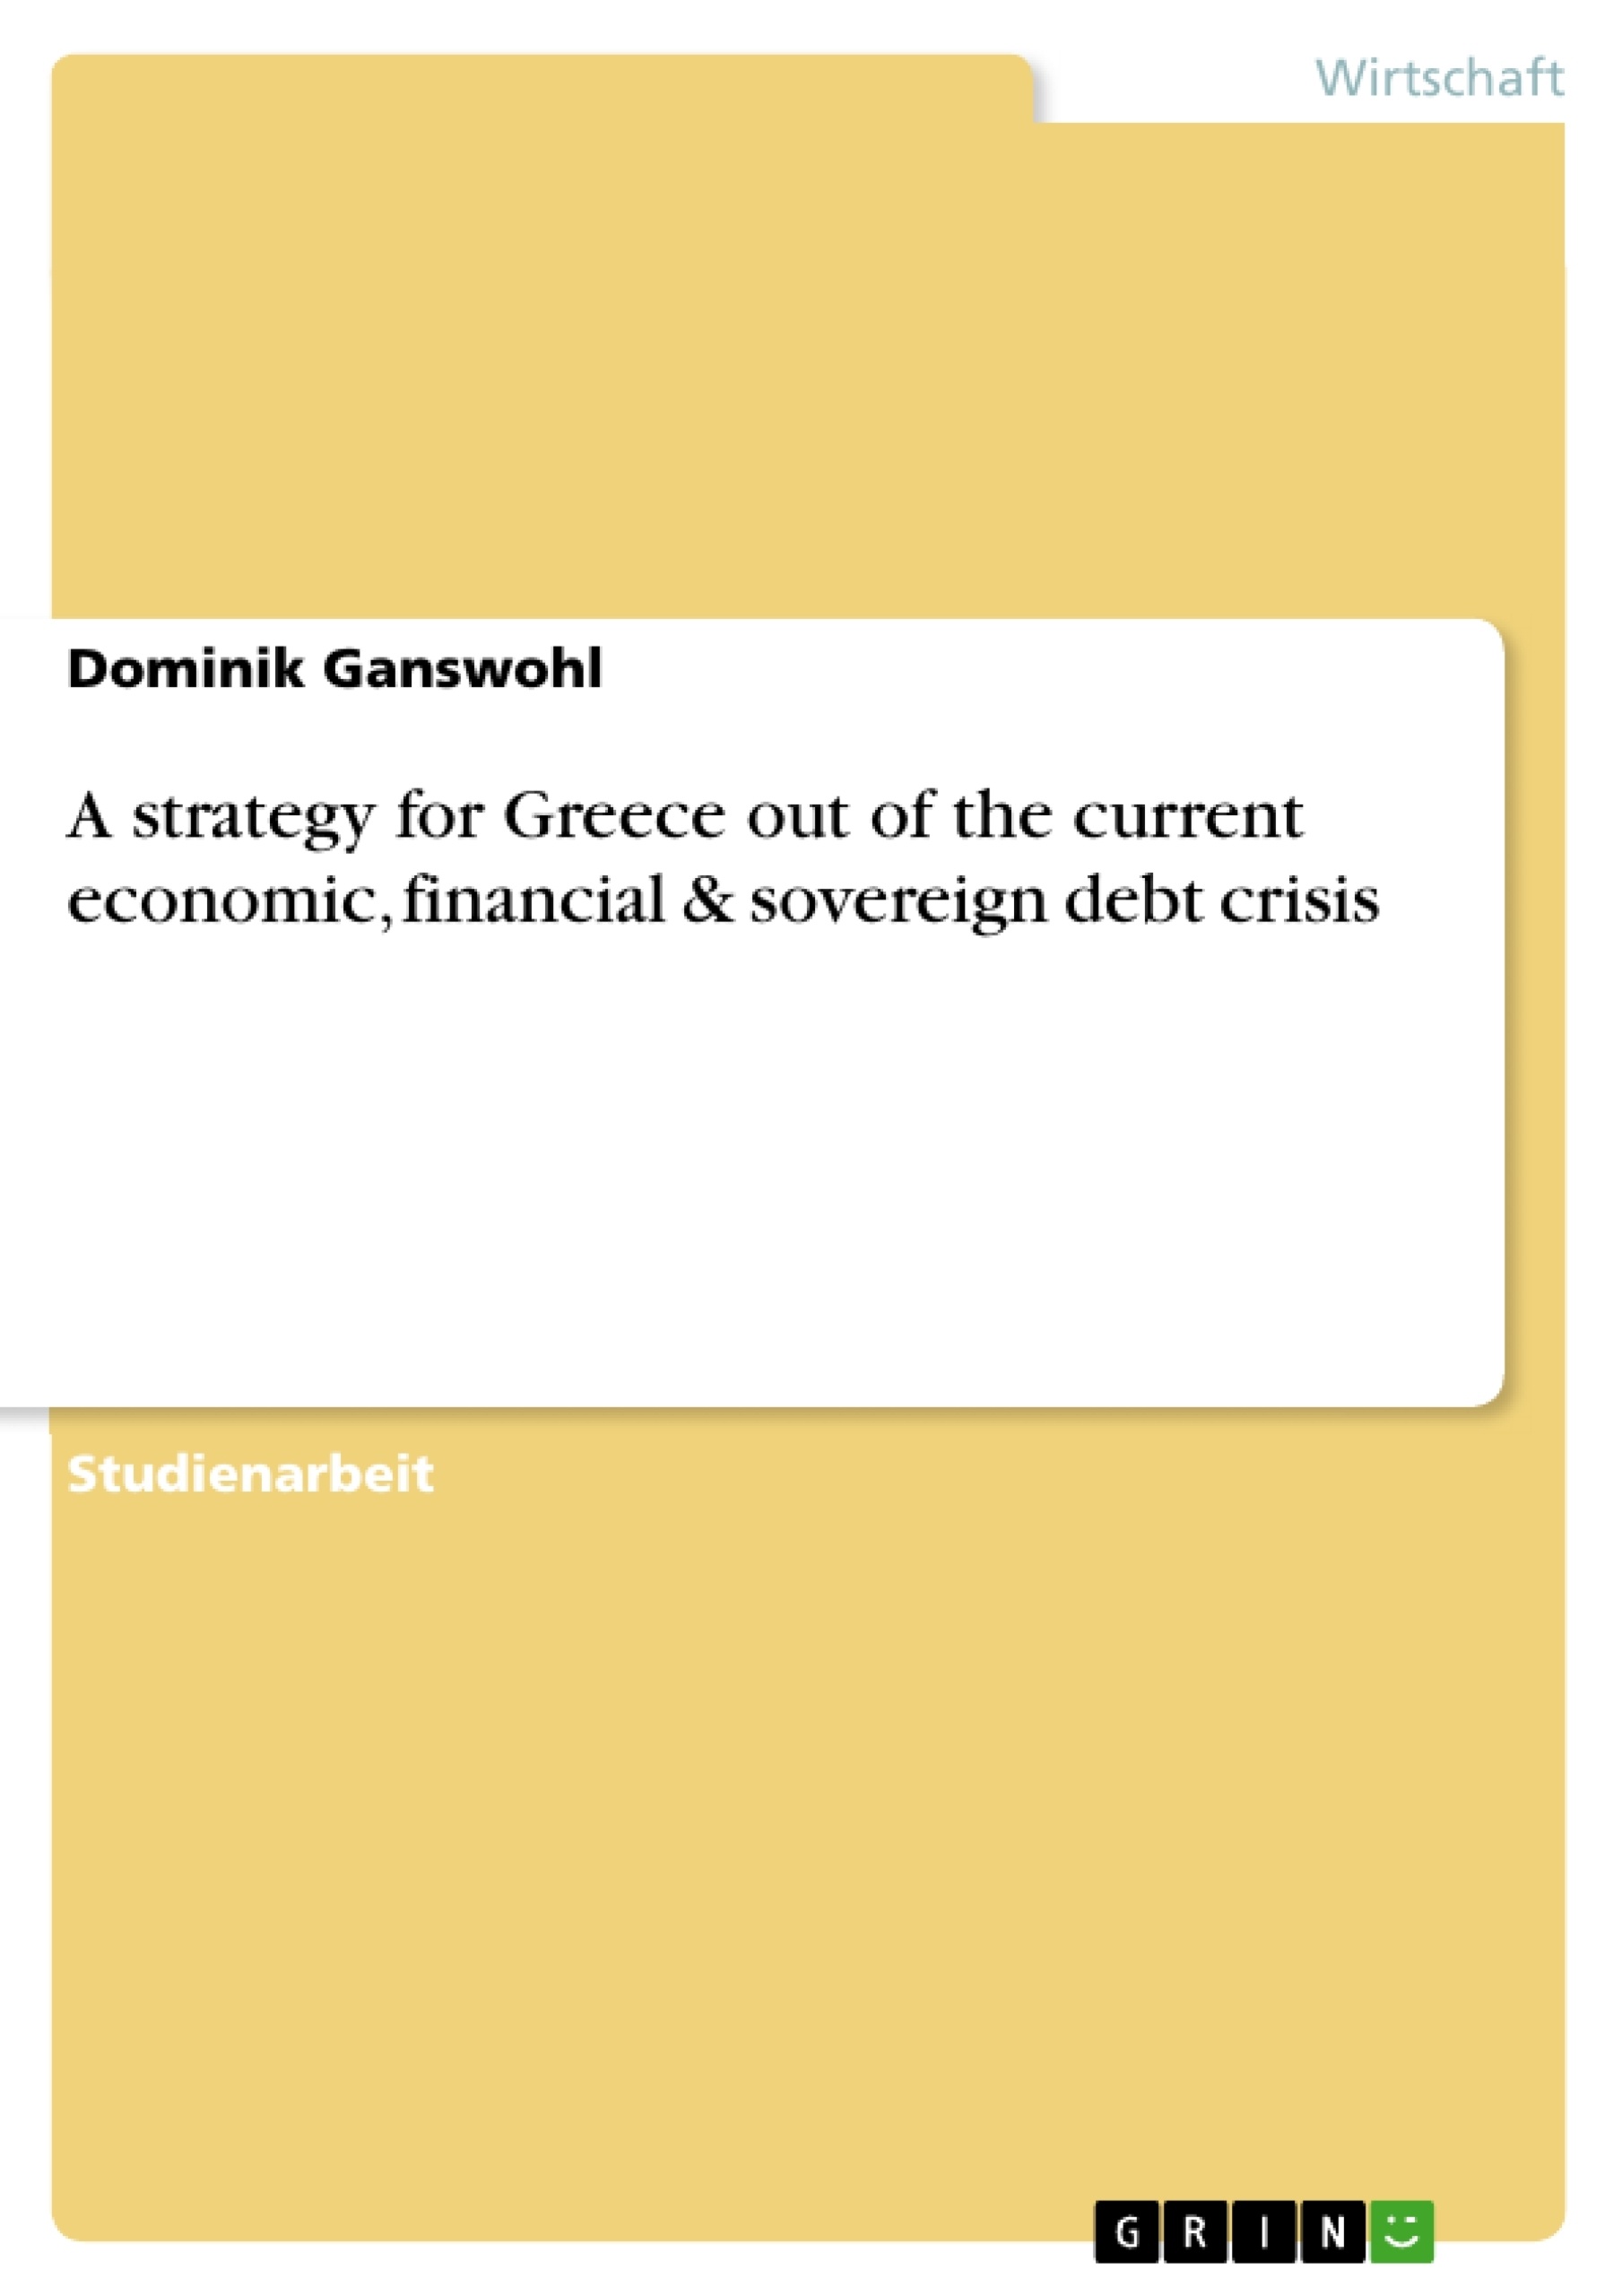 Titre: A strategy for Greece out of the current economic, financial & sovereign debt crisis